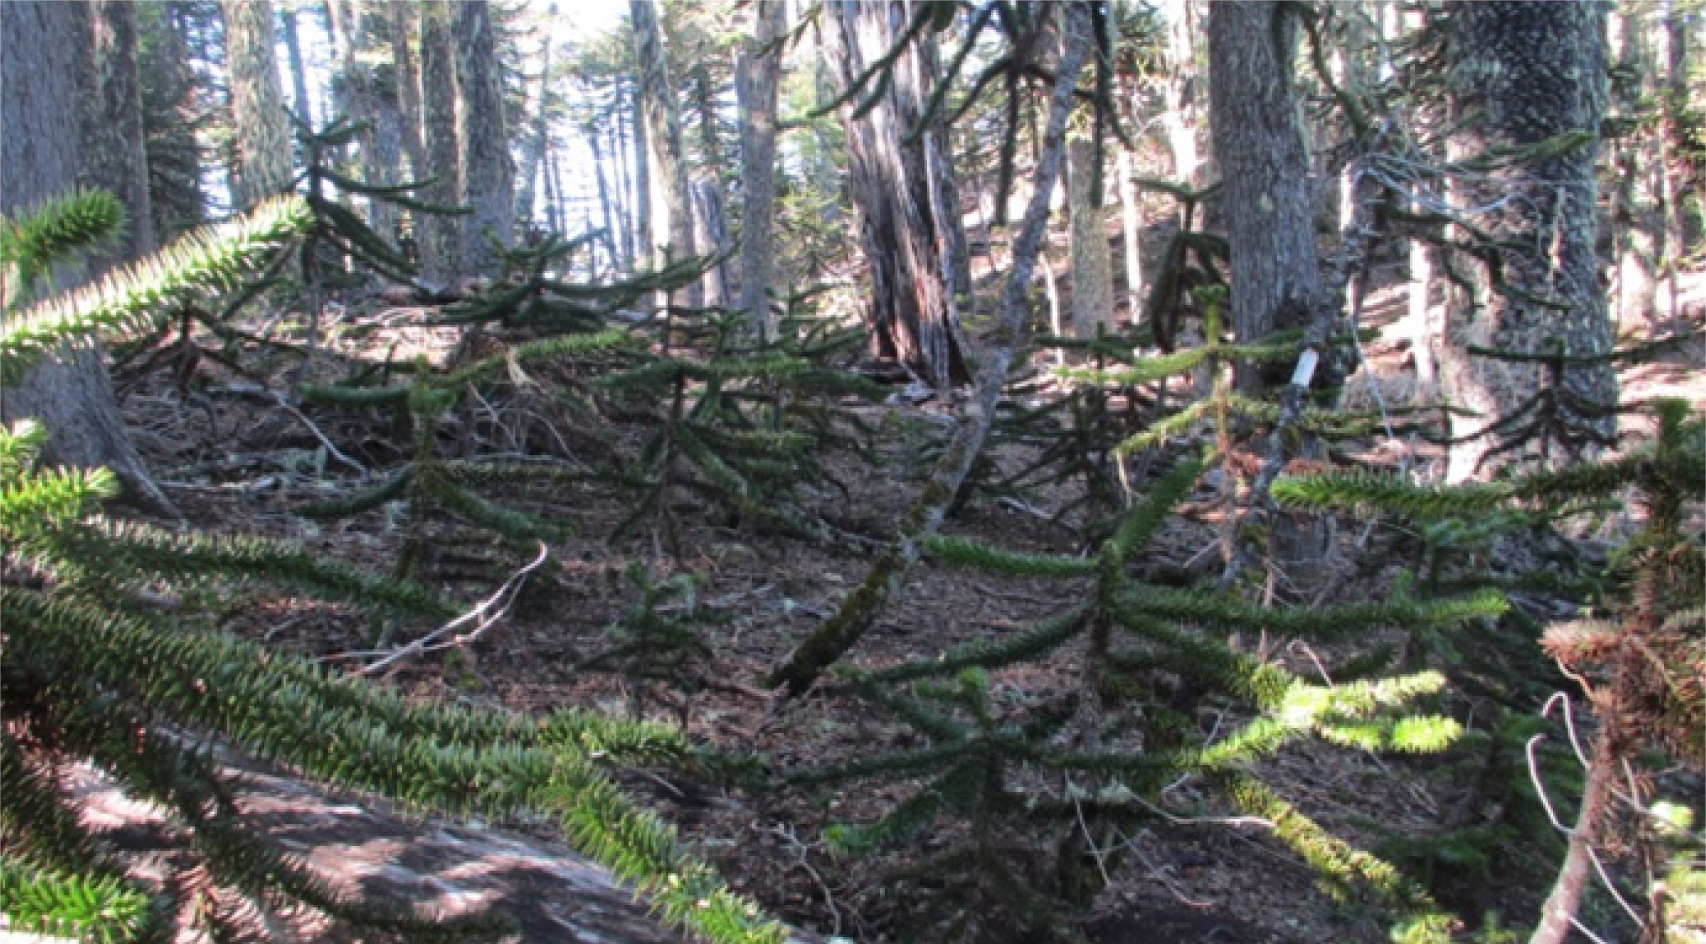 Fig. 8. Regrowth in the araucaria and nothofagus litterdrop forest with a sparse upper arboreal layer.